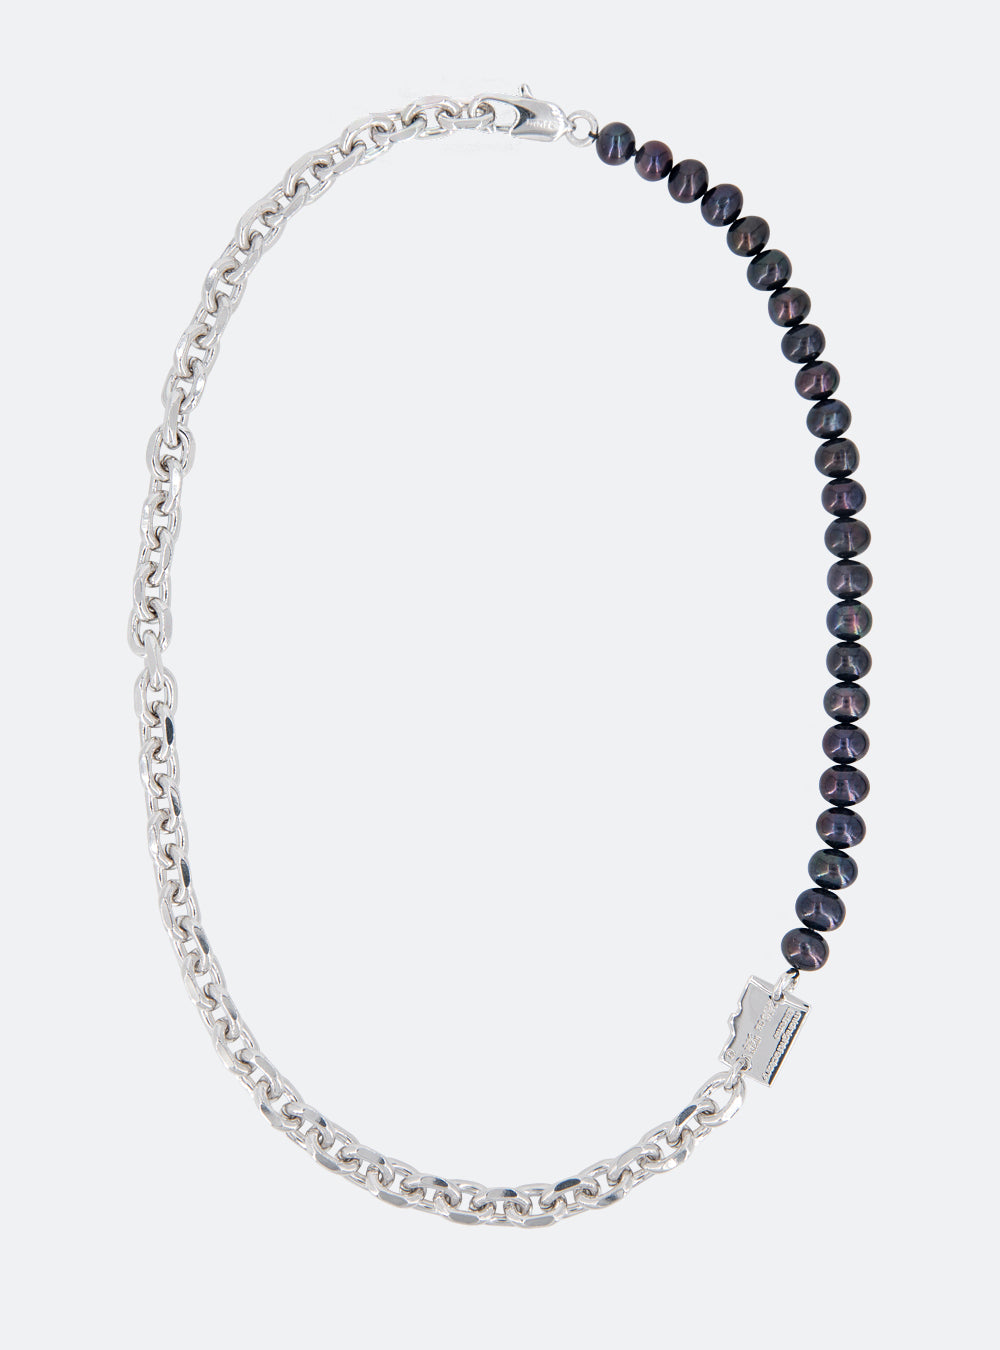 A Micro-SD black freshwater pearls necklace with adjustable length by MIDNIGHTFACTORY. [Pre-order]